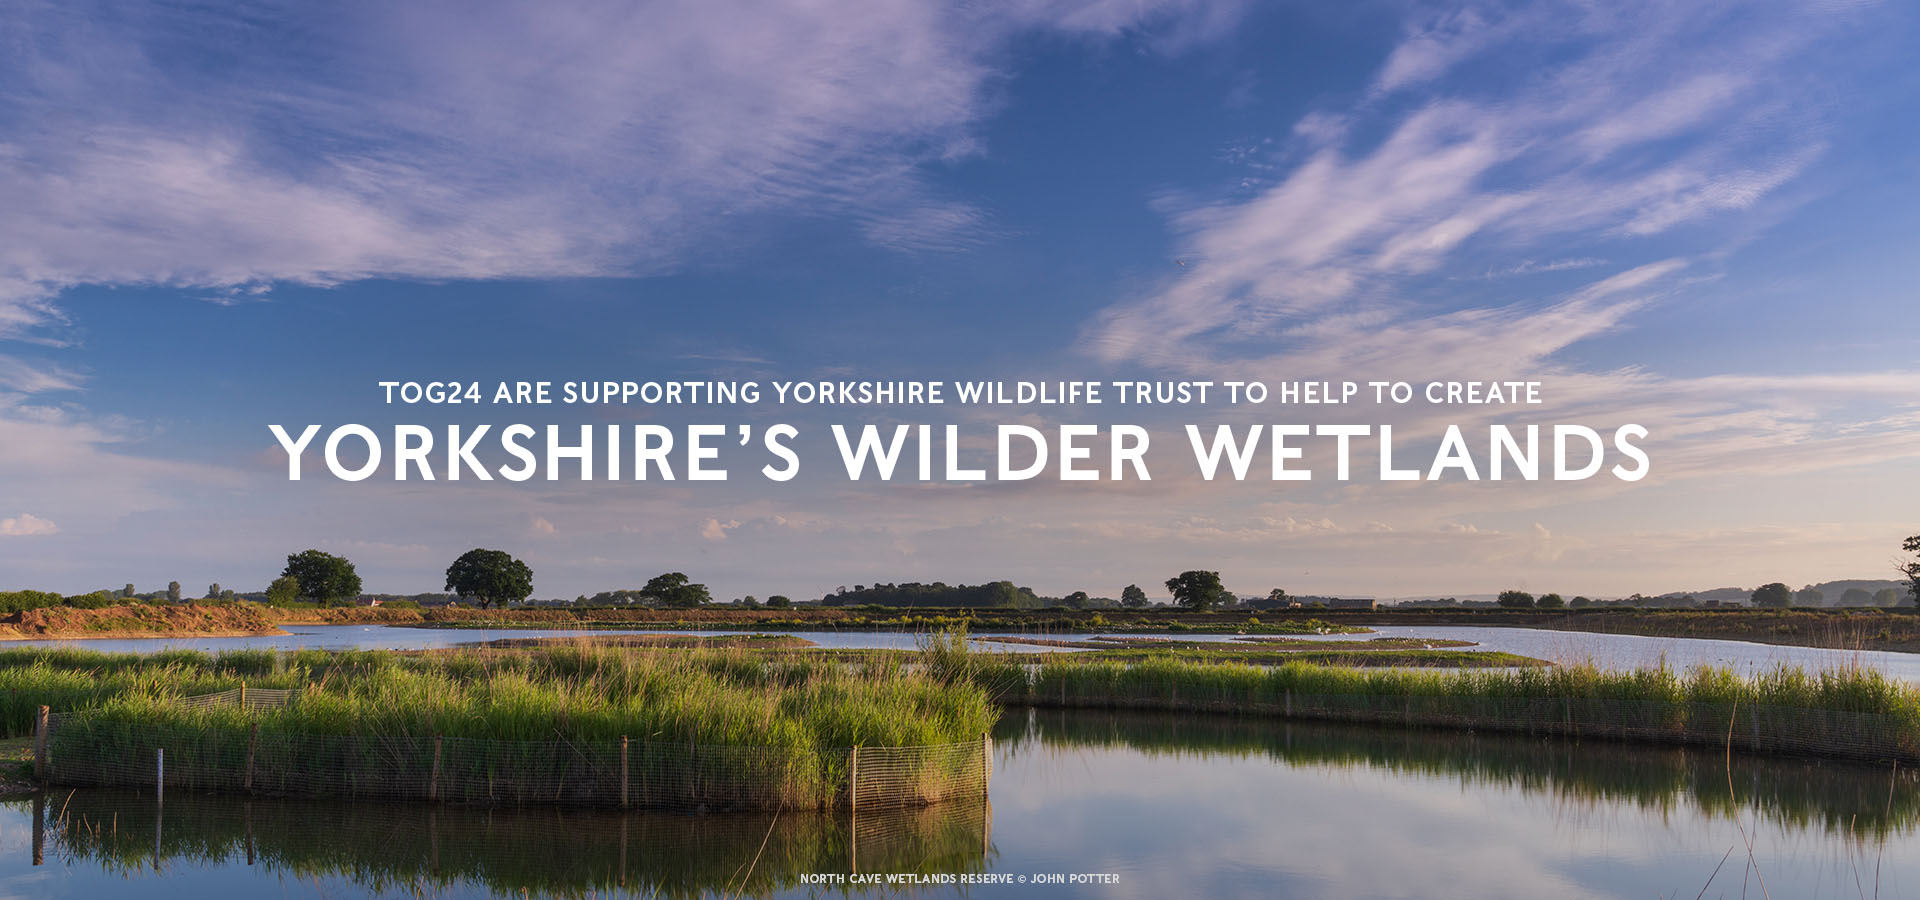 TOG24 are supporting Yorkshire wildlife trust to help to create Yorkshire’s wilder wetlands